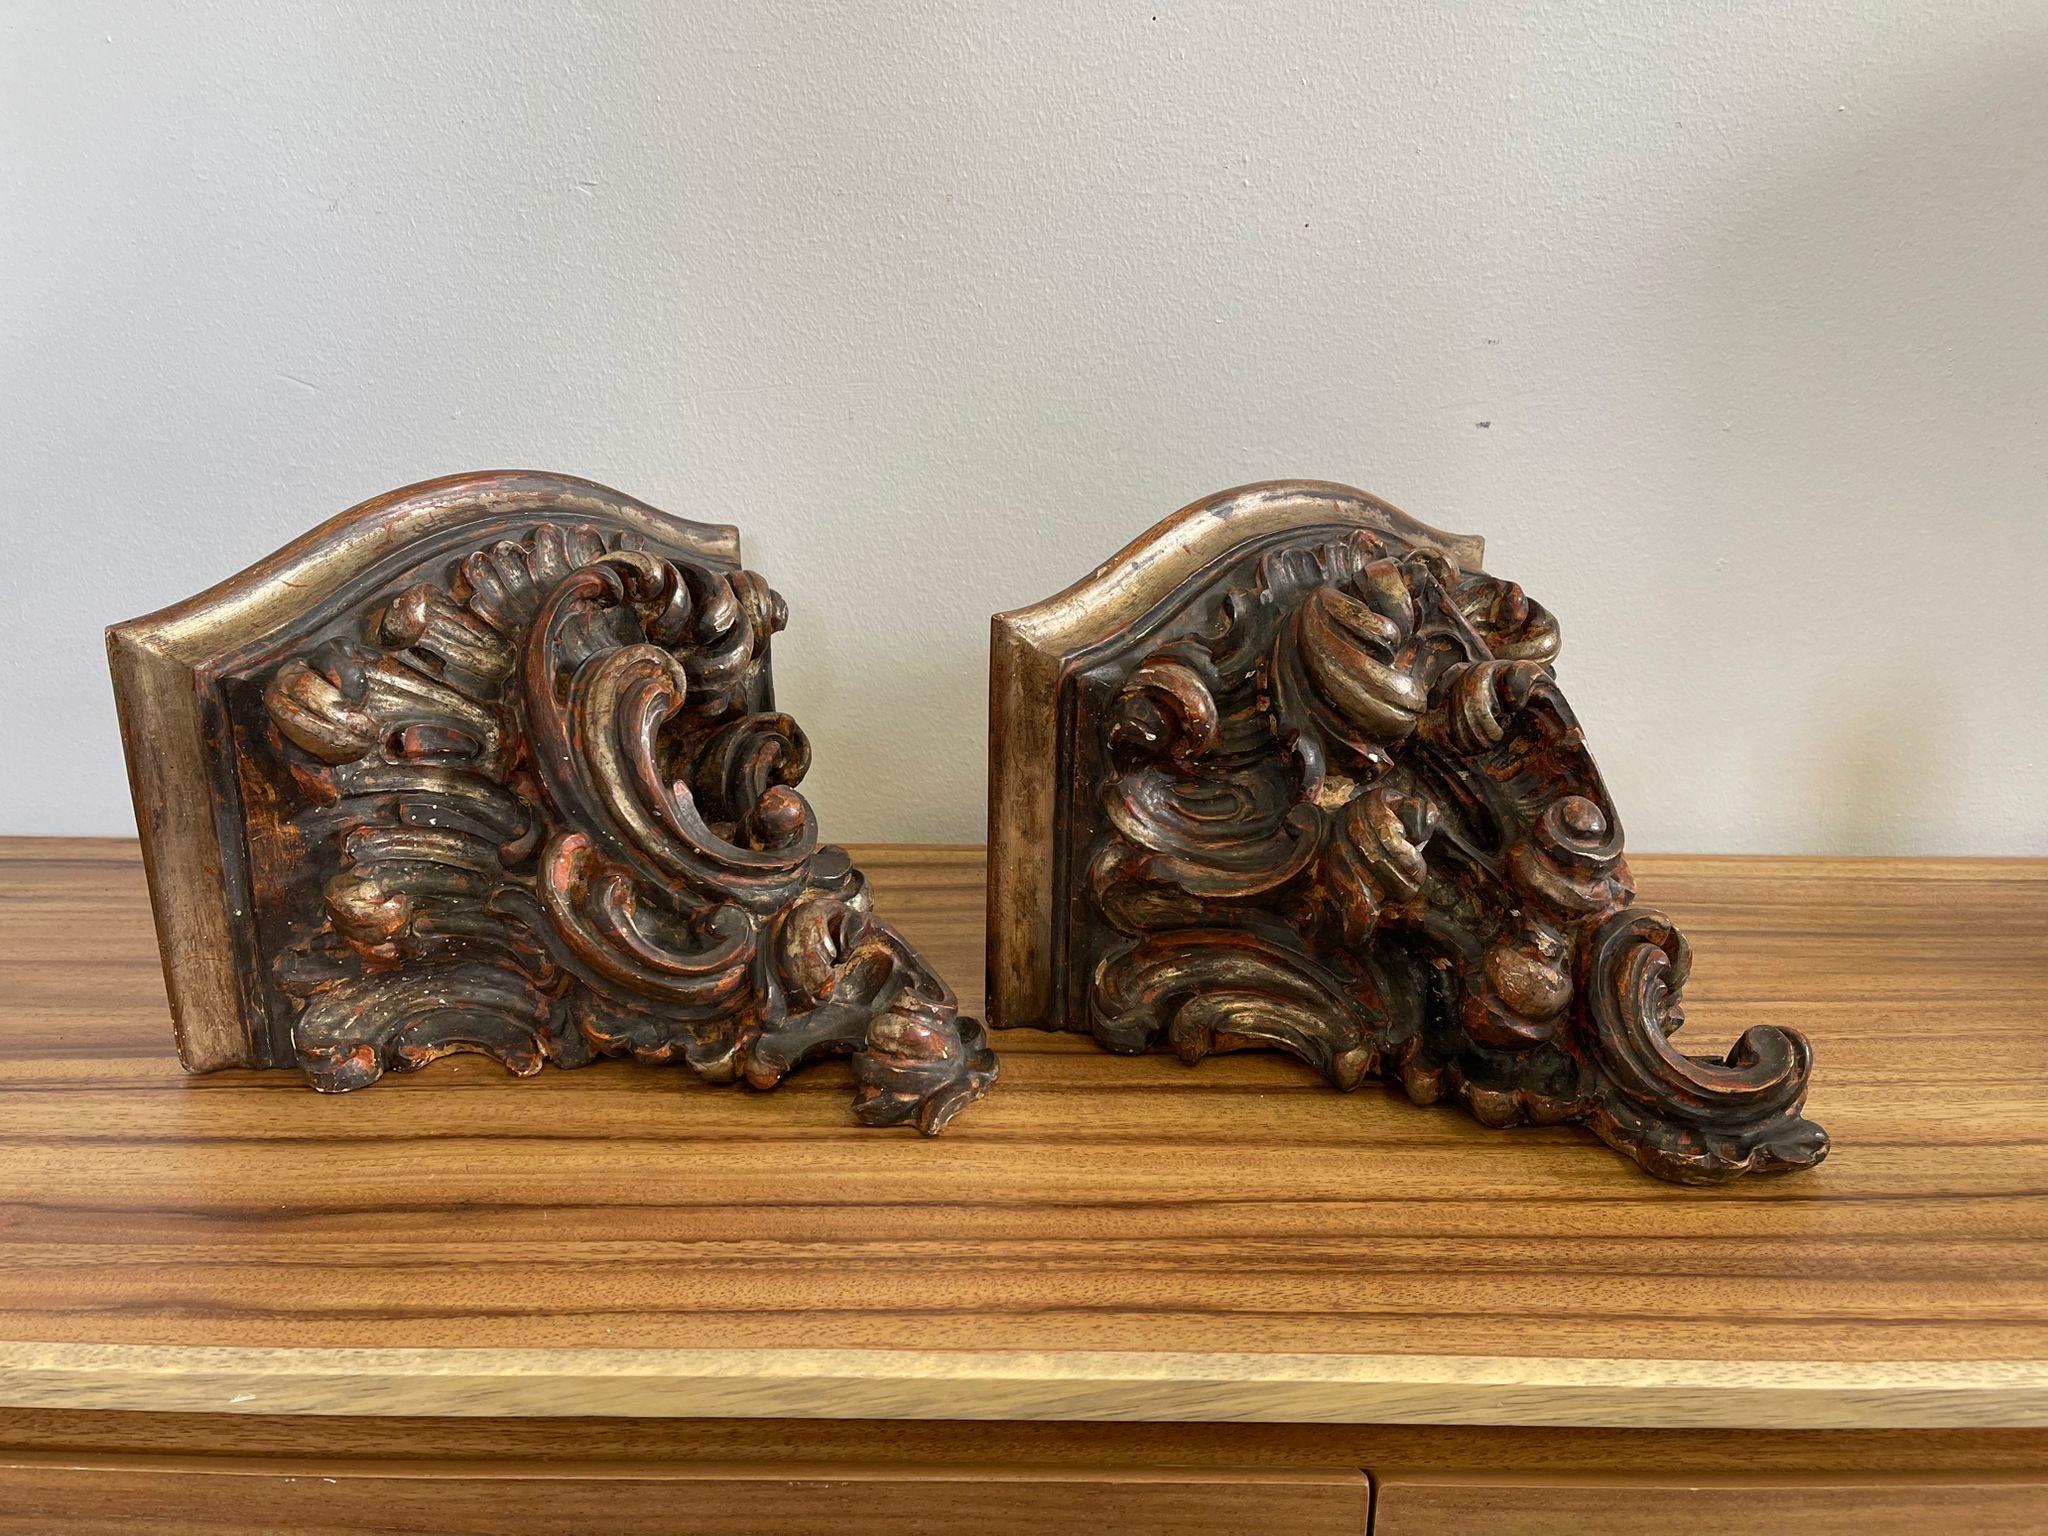 This could be used for a variety of purposes such as Book Ends, Corbels or wall shelving. Painted intricate wood design with beautiful Patina. Vintage Condition Consistent with Age as Pictured.

Dimensions. 11 W ; 8 W ; 20 H